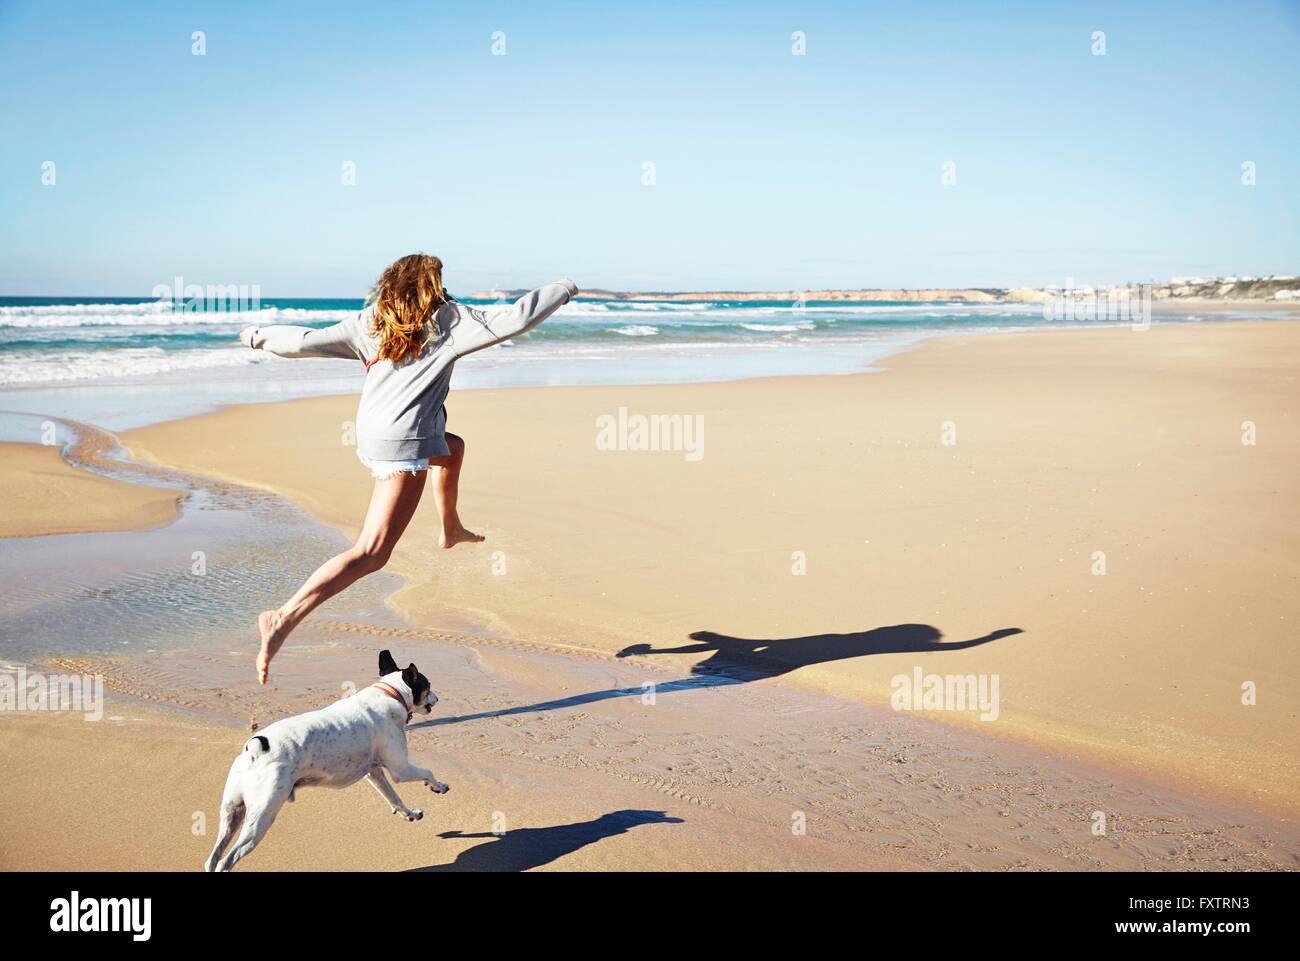 Mature woman and dog leaping over water on beach, Conil de la Frontera, Spain Stock Photo